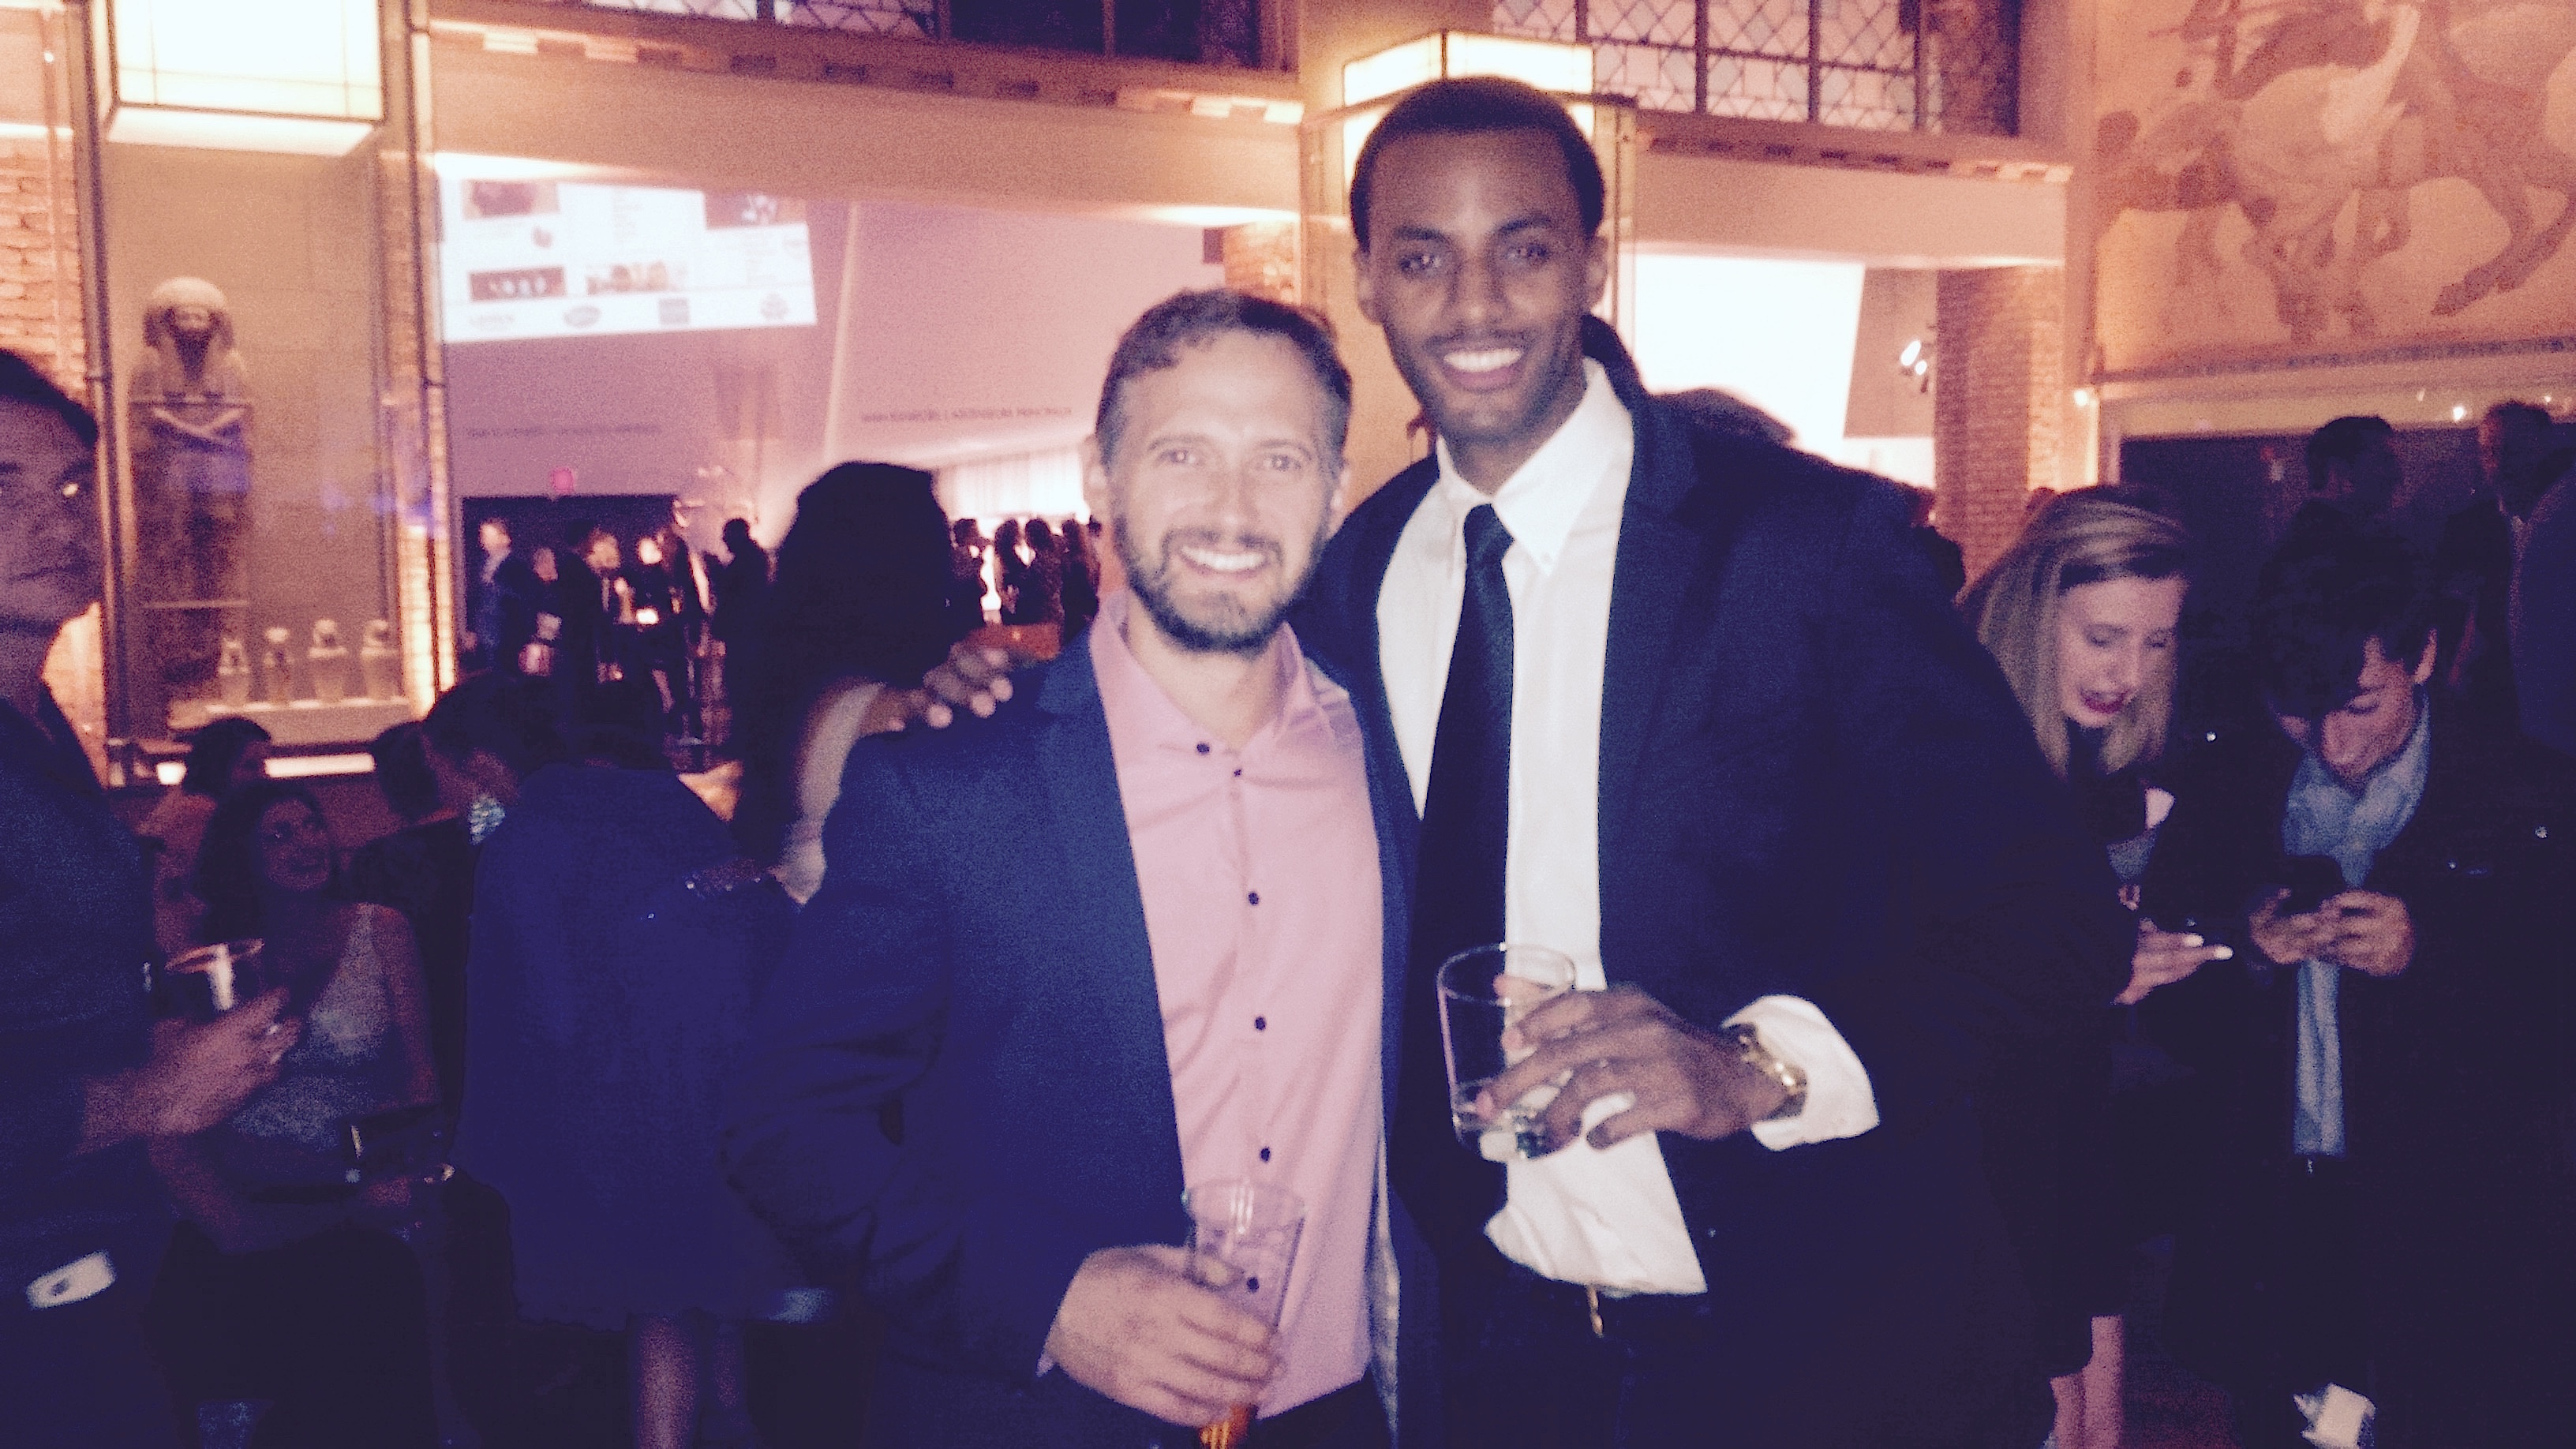 David Ritchie with Jordan Johnson-Hinds at The Producers Ball.